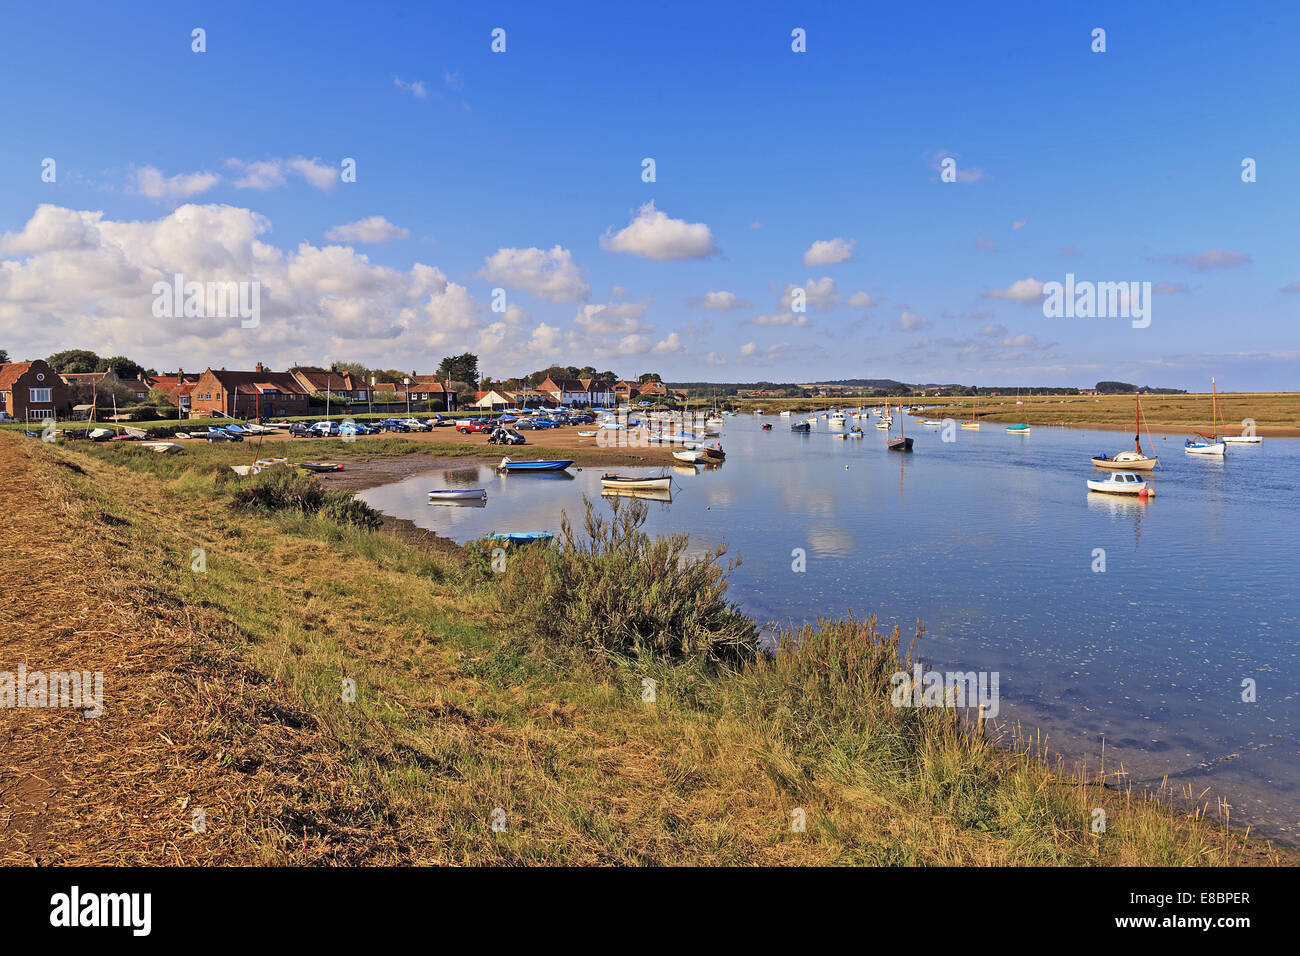 Barche ancorate a Burnham Overy Staithe, North Norfolk Foto Stock